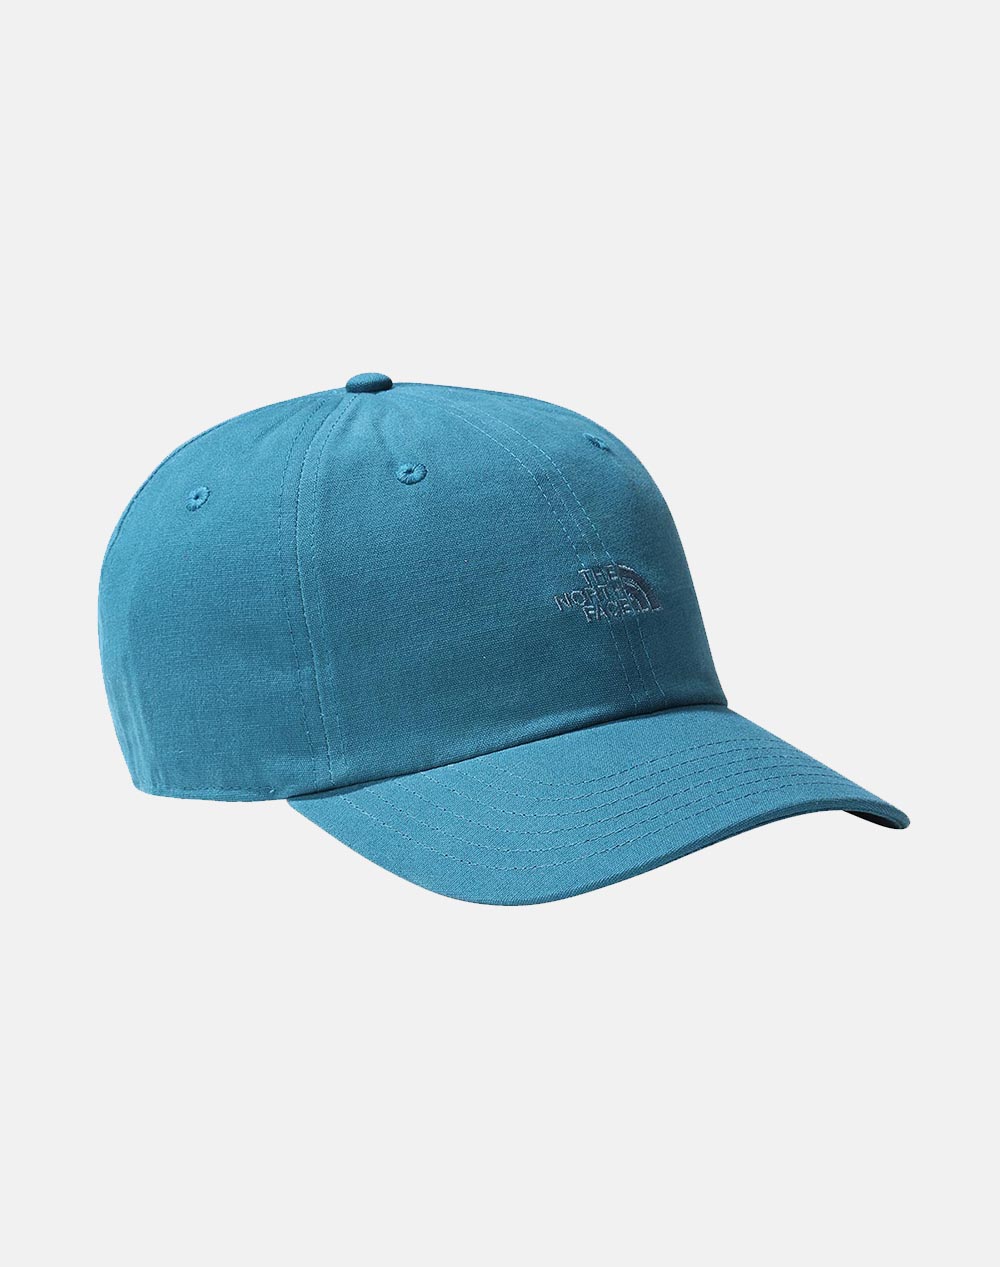 THE NORTH FACE WASHED NORM HAT NF0A3FKN-NFEFS SteelBlue 3620ATNFA5700002_XR23292